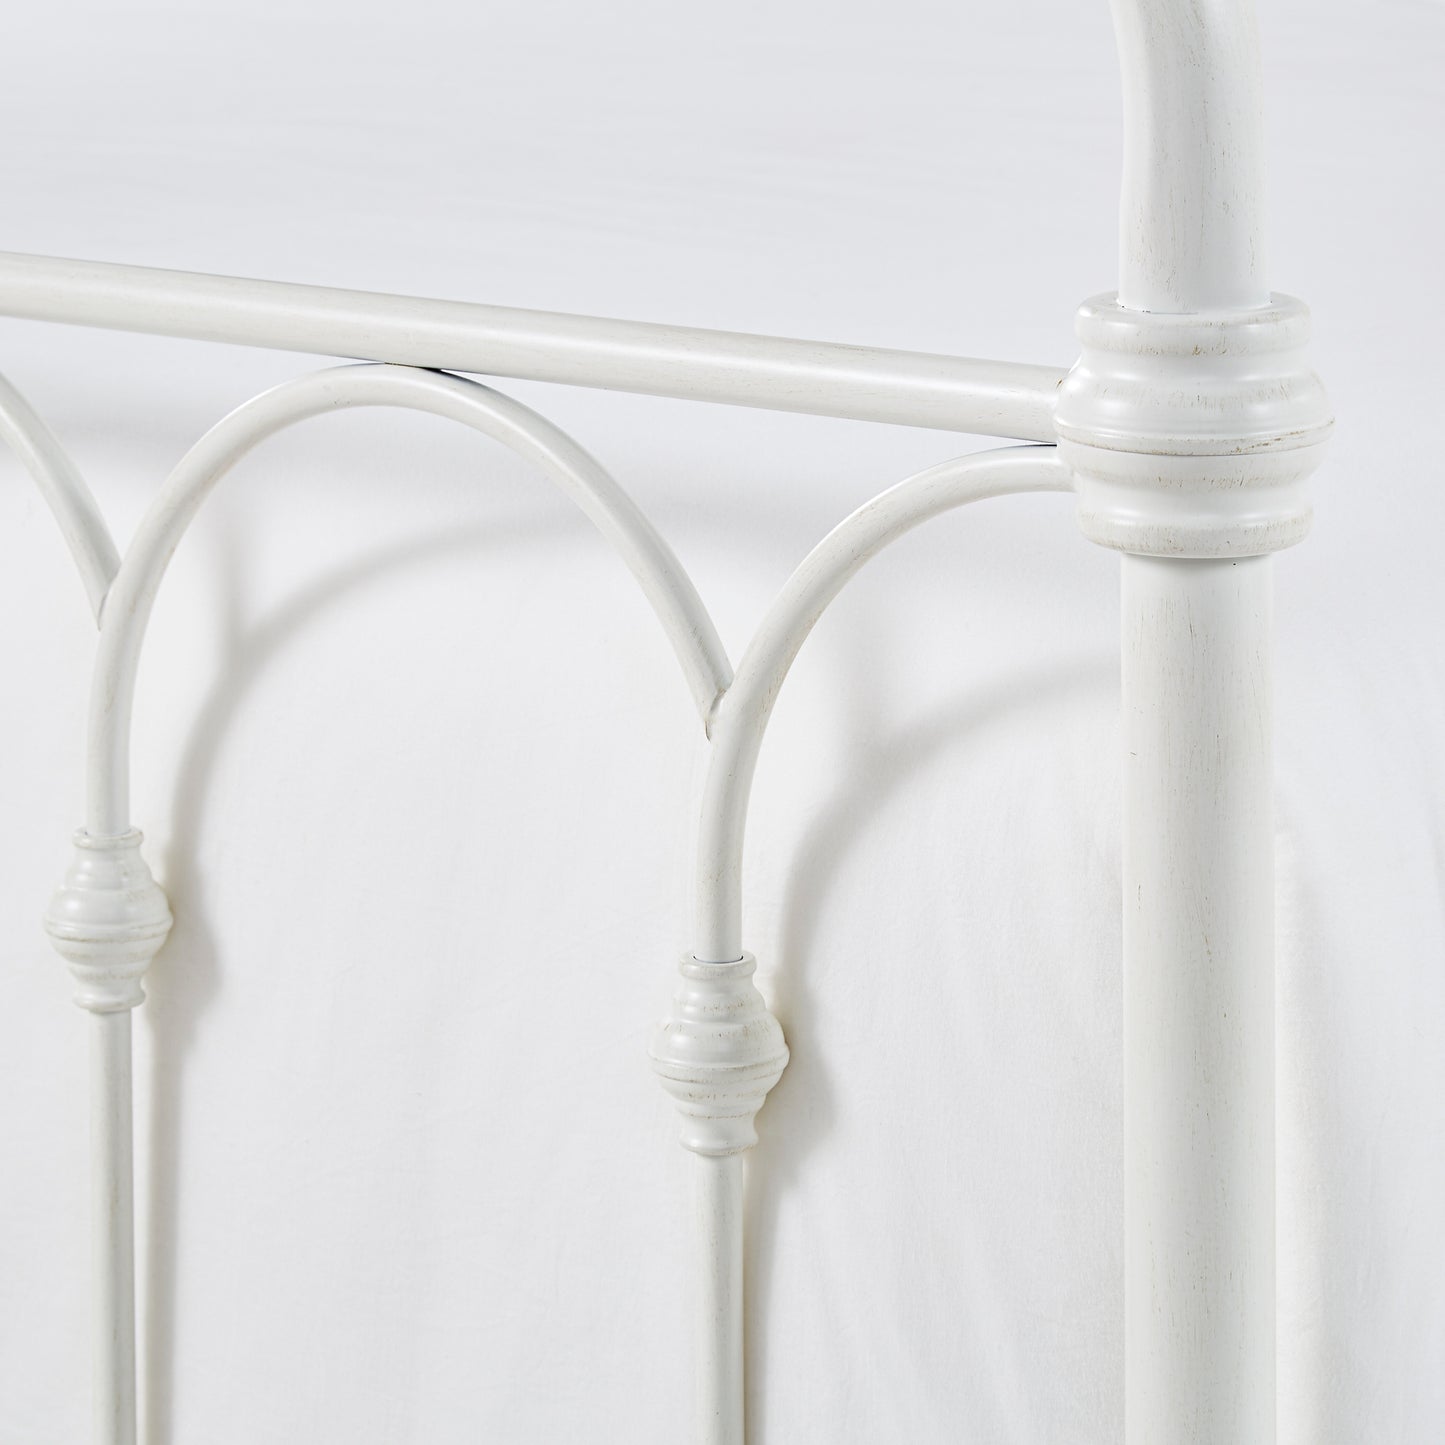 Casted Knot Metal Bed - Antique White, King (King Size)